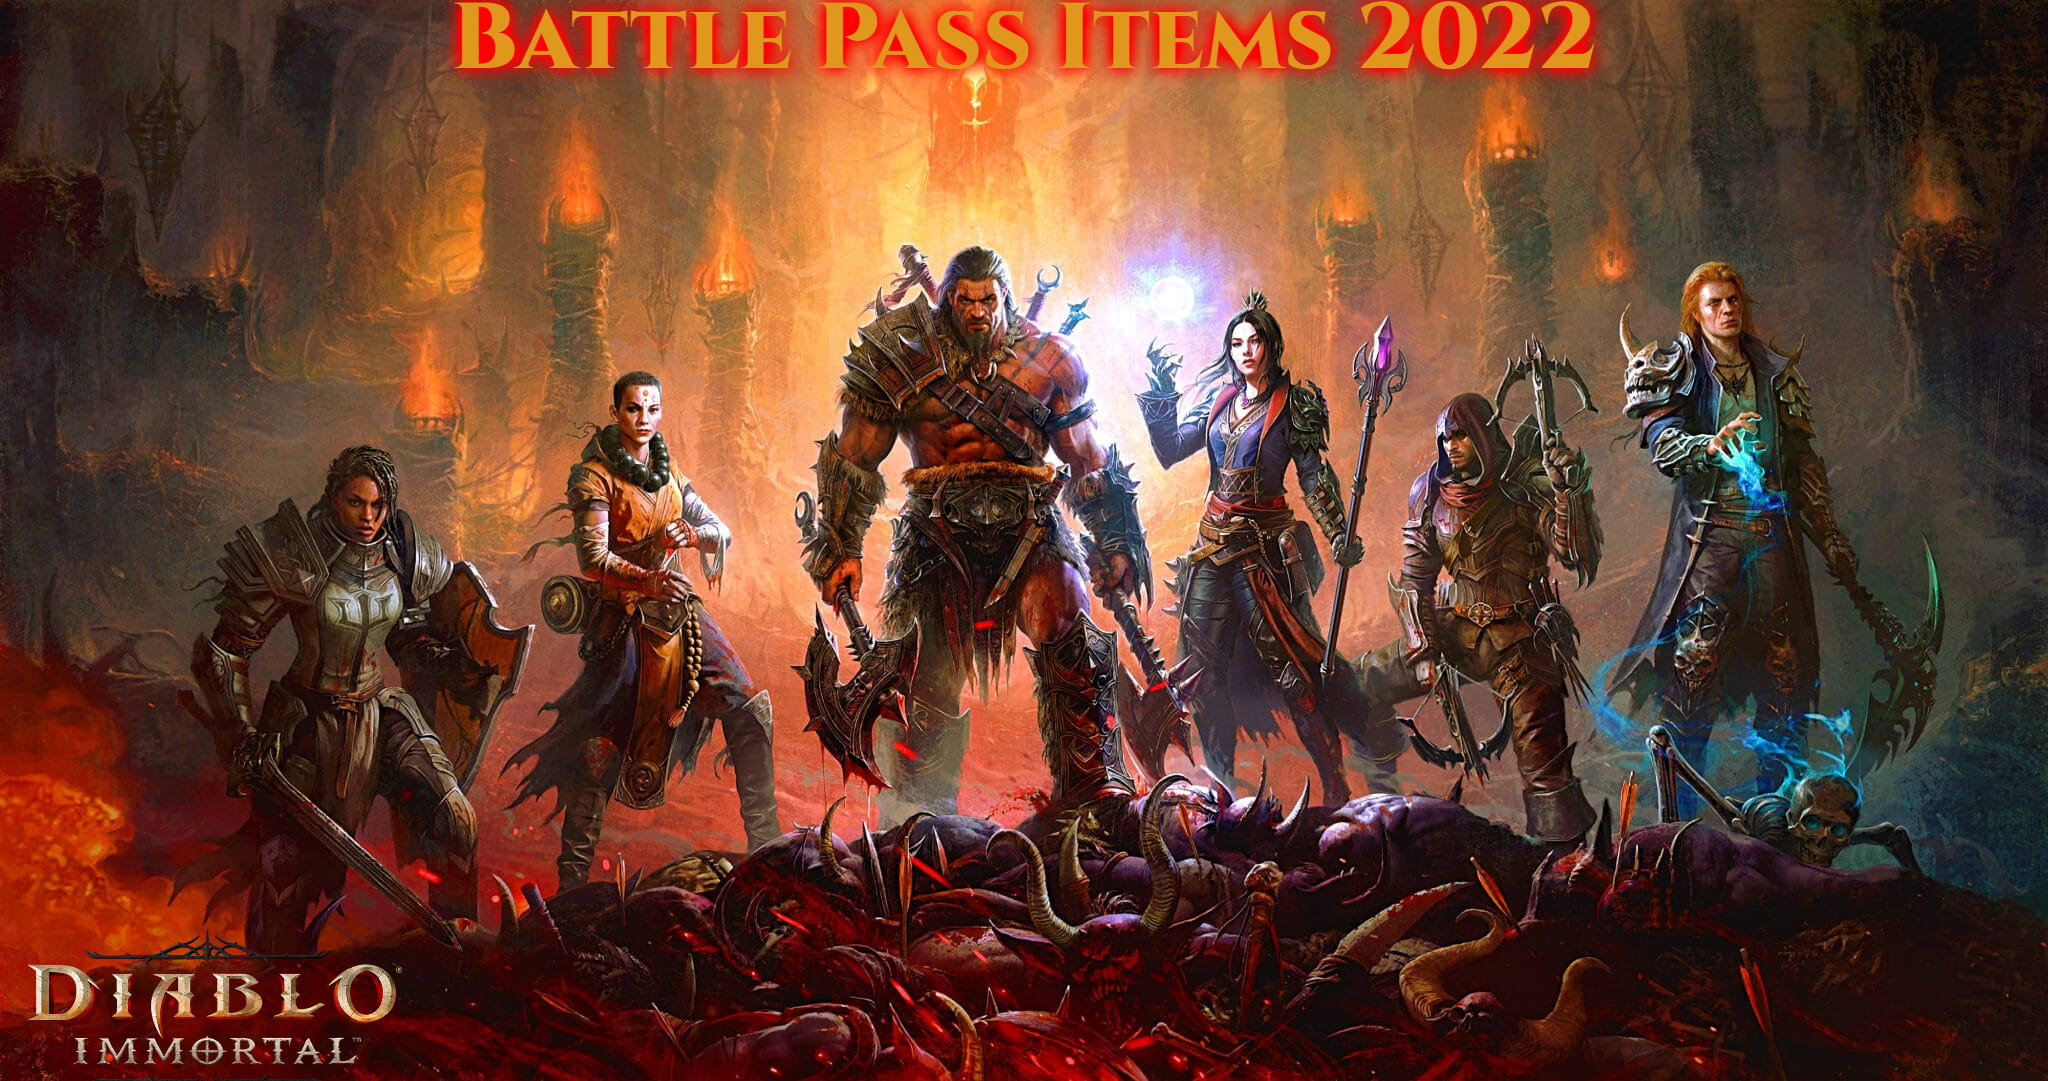 You are currently viewing Diablo Immortal Battle Pass Items 2022